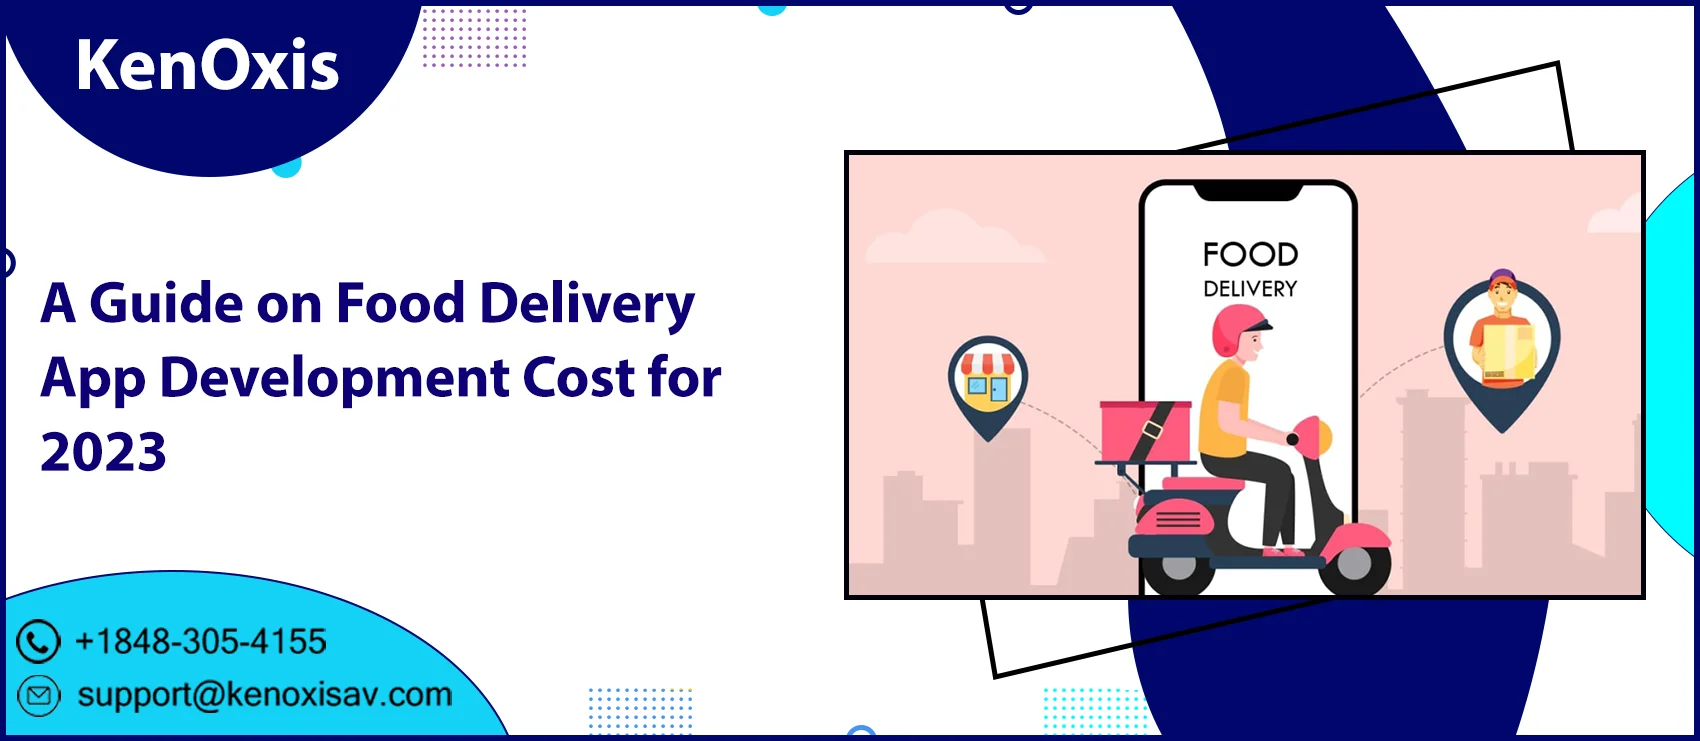 A Guide on Food Delivery App Development Cost for 2023